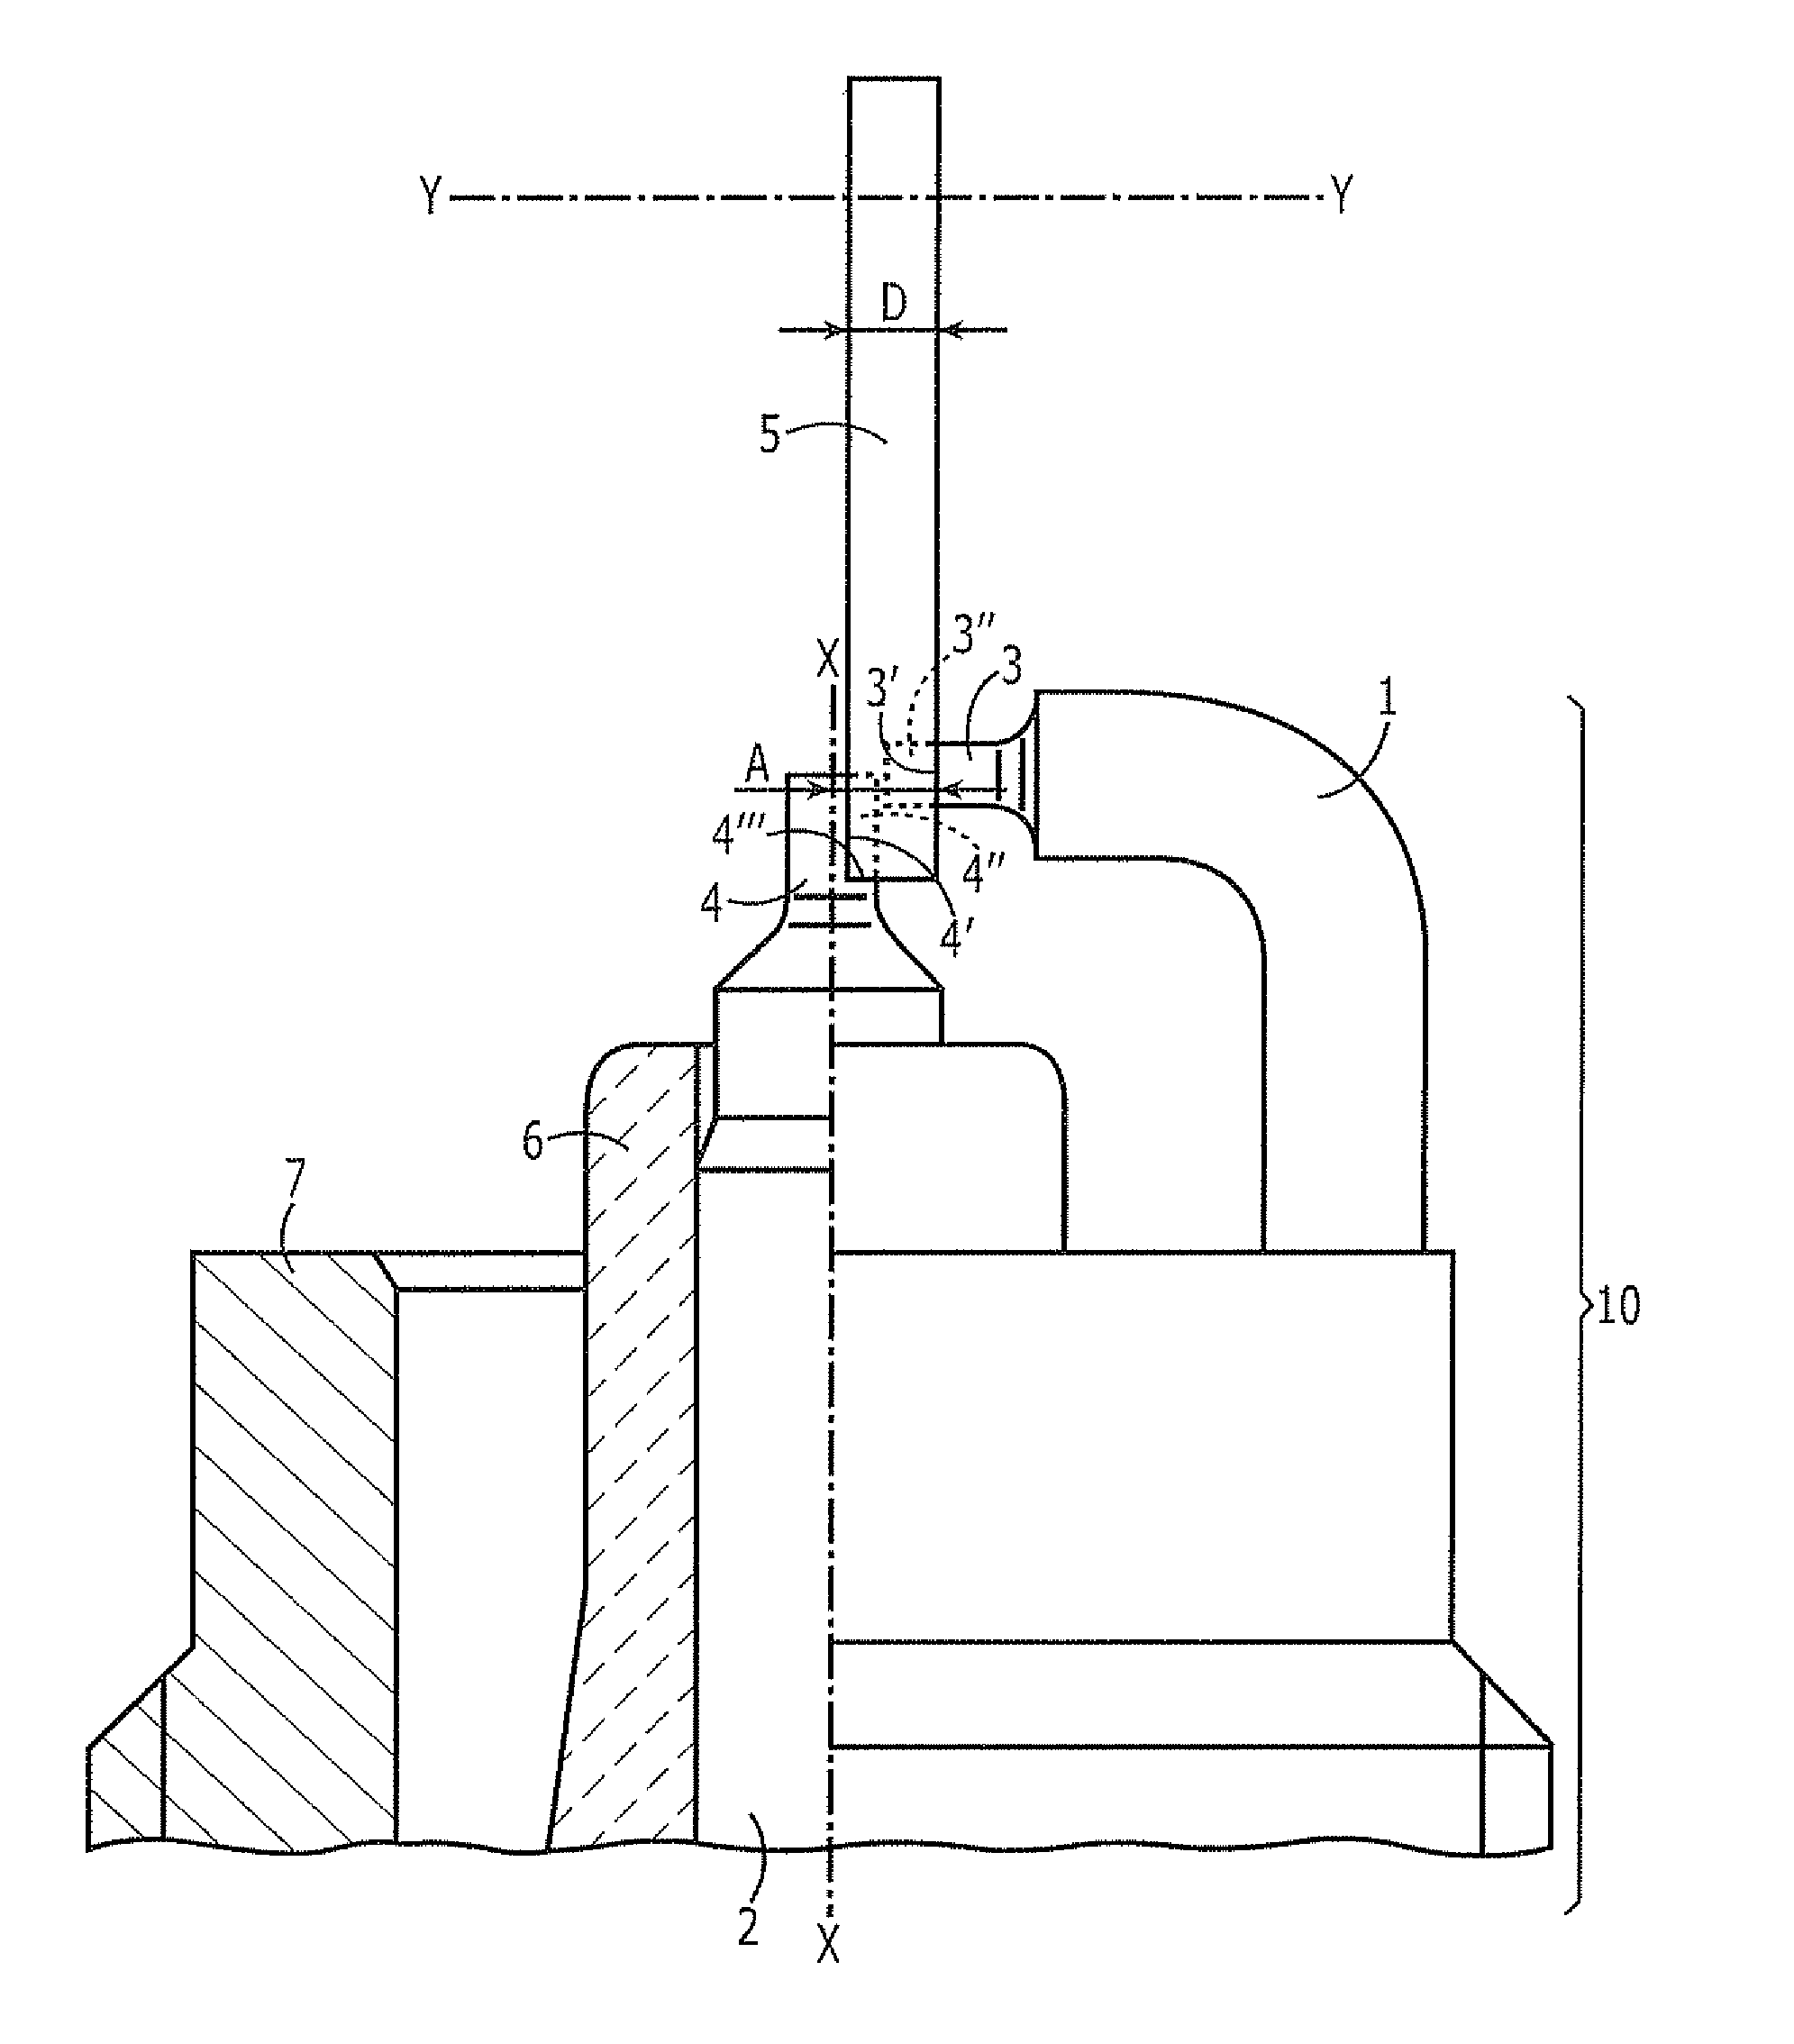 Method for manufacturing a spark plug having a laterally oriented ground electrode